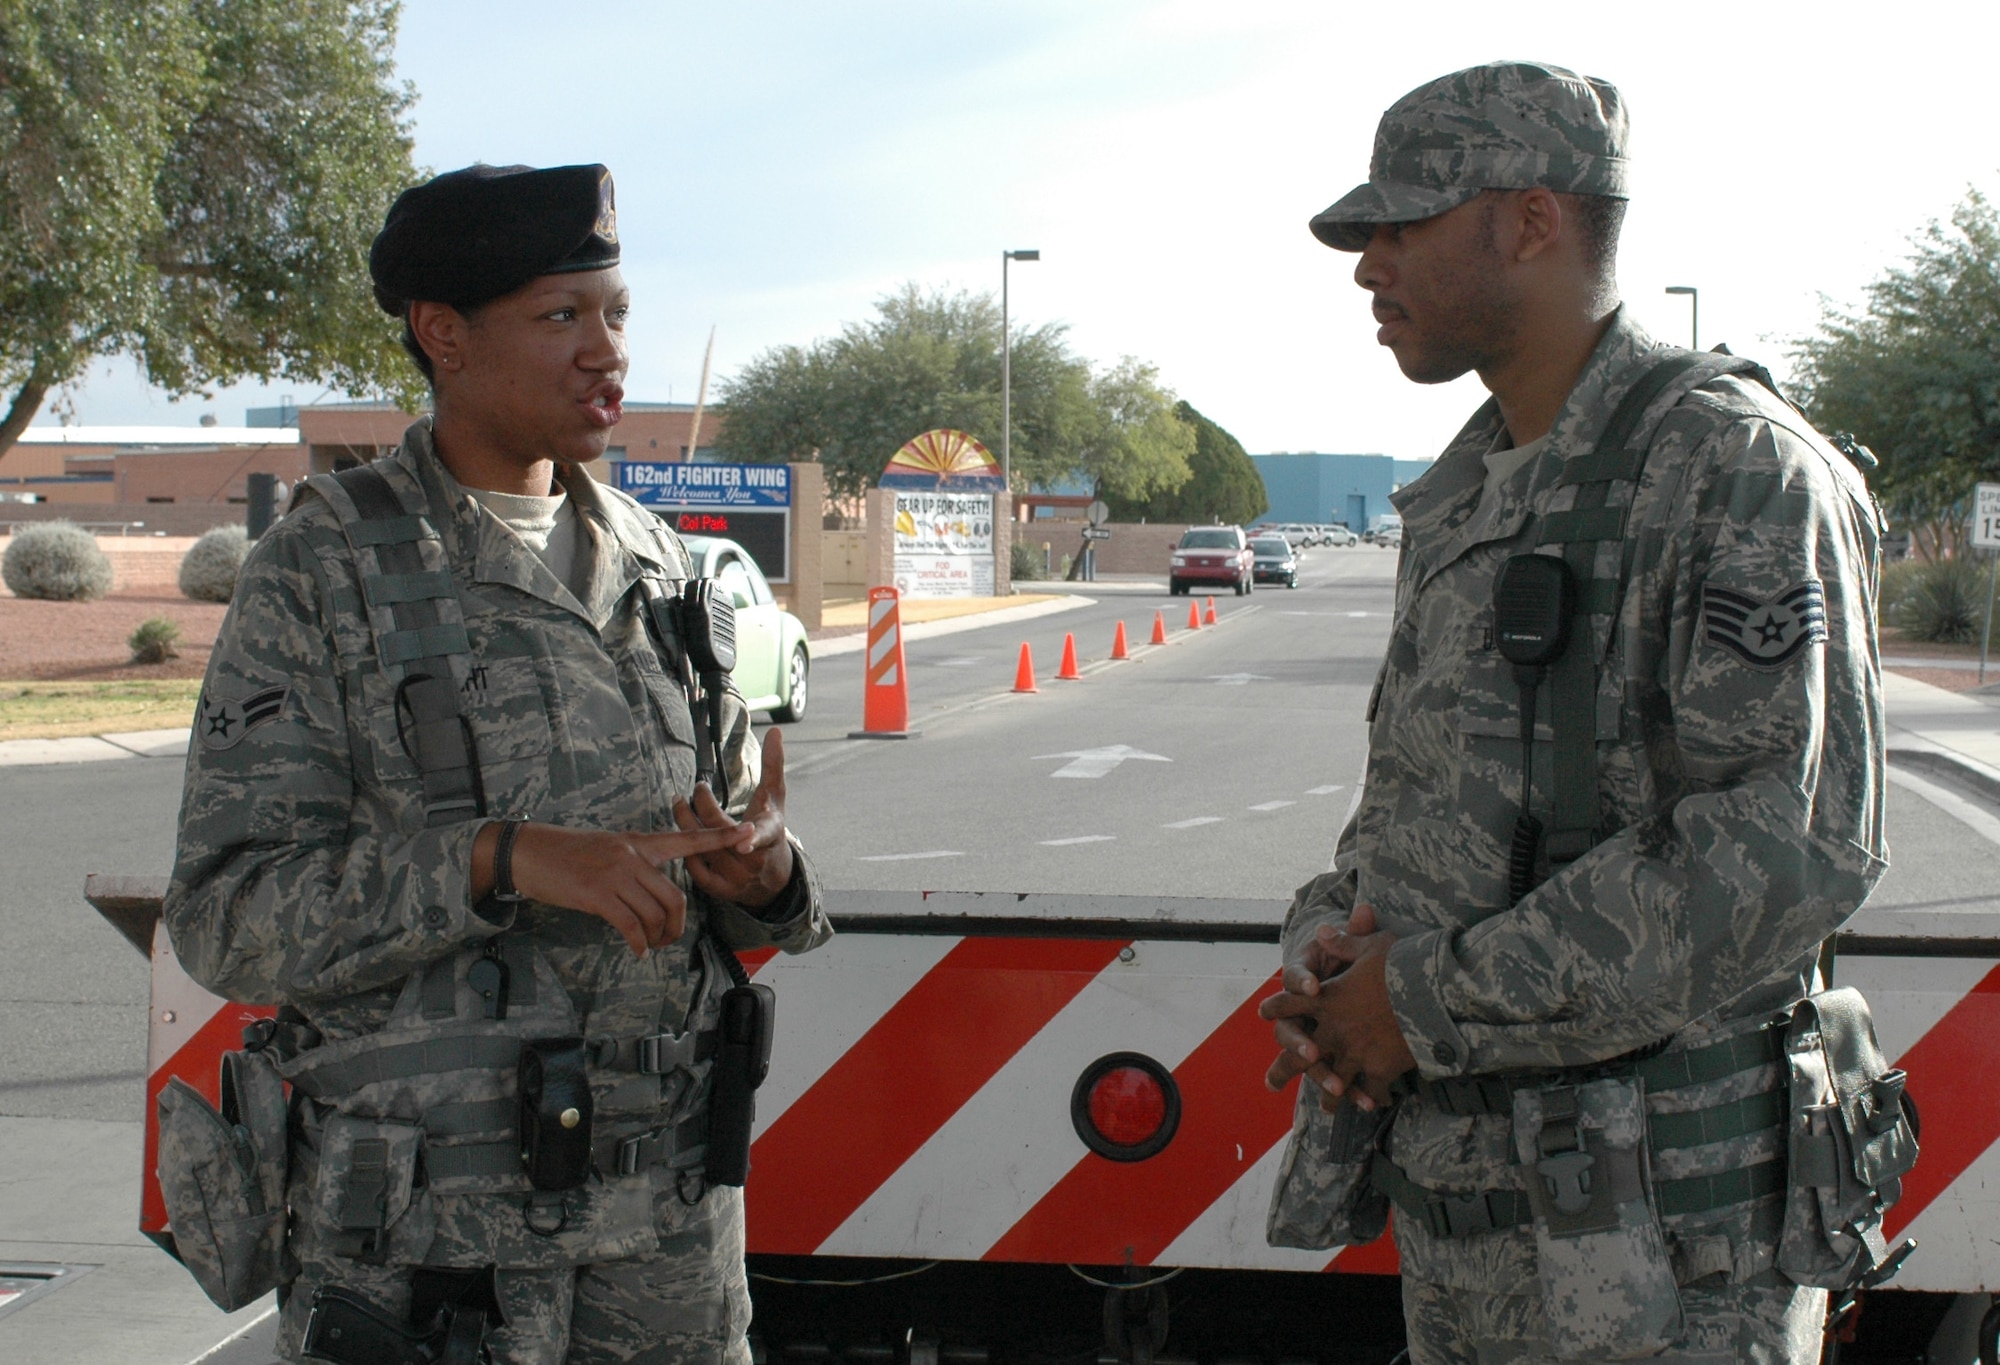 Airman 1st Class Nichole Knight, security forces, instructs Staff Sgt. Virgil Brandy, augmentee, on the eight preconditions for use of deadly force. Sergeant Brandy is one of several part-time Guardsmen who have taken temporary full-time positions to augment the 162nd Security Forces Squadron at Tucson International Airport while 31 regular members are deployed to Iraq. Prior to his temporary assignment Brandy served in the wing’s disaster preparedness section. (U.S. Air Force photo by Staff Sgt. Jordan Jones)